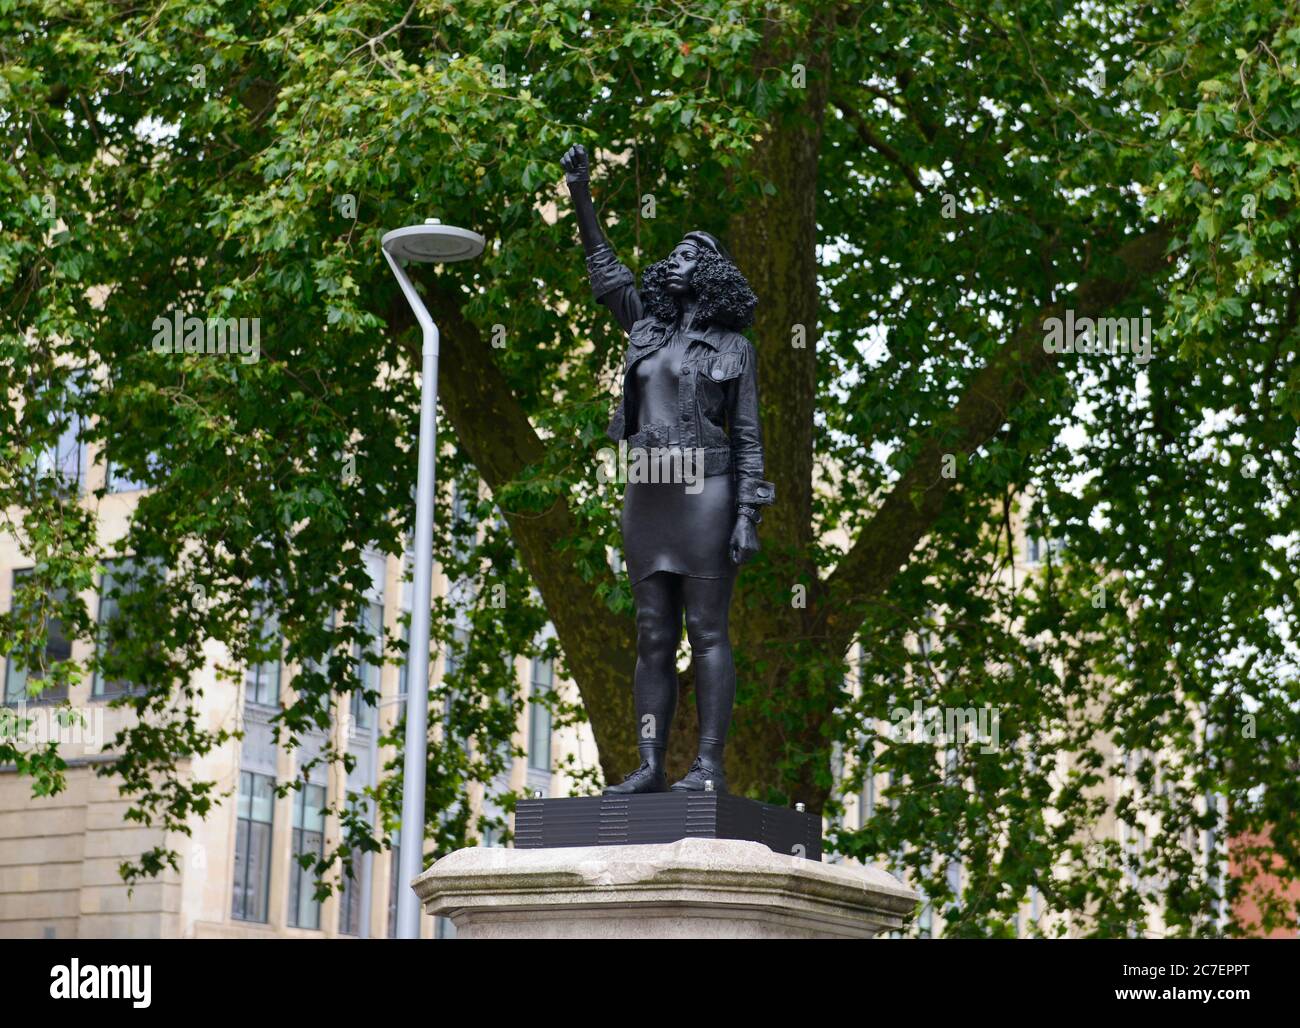 The "A Surge of Power (Jen Reid)" statue stands on the plinth occupied by Edward Colston's statue since 1895 in Bristol, UK, for just one day in July. Stock Photo